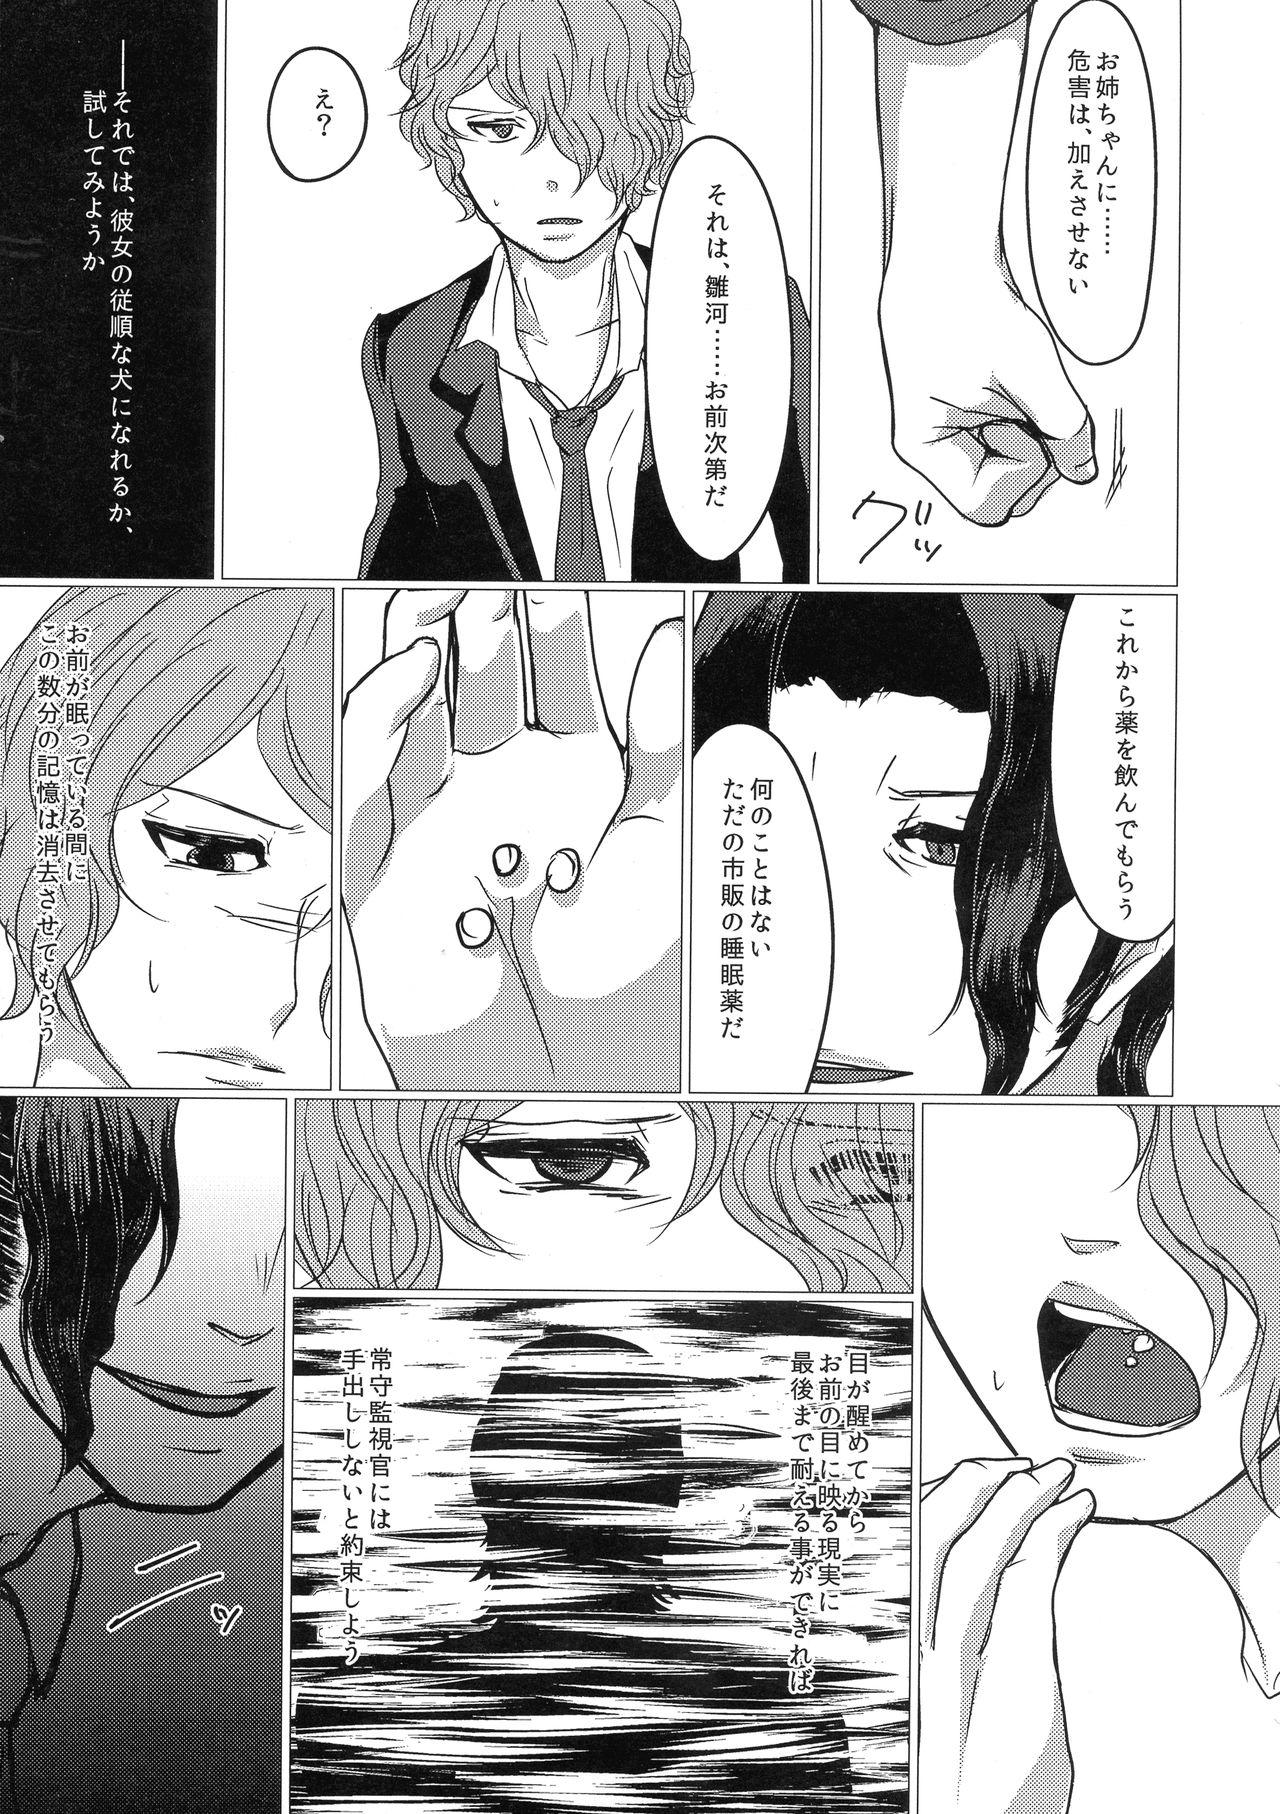 Titten I/O - Psycho-pass Colombia - Page 11